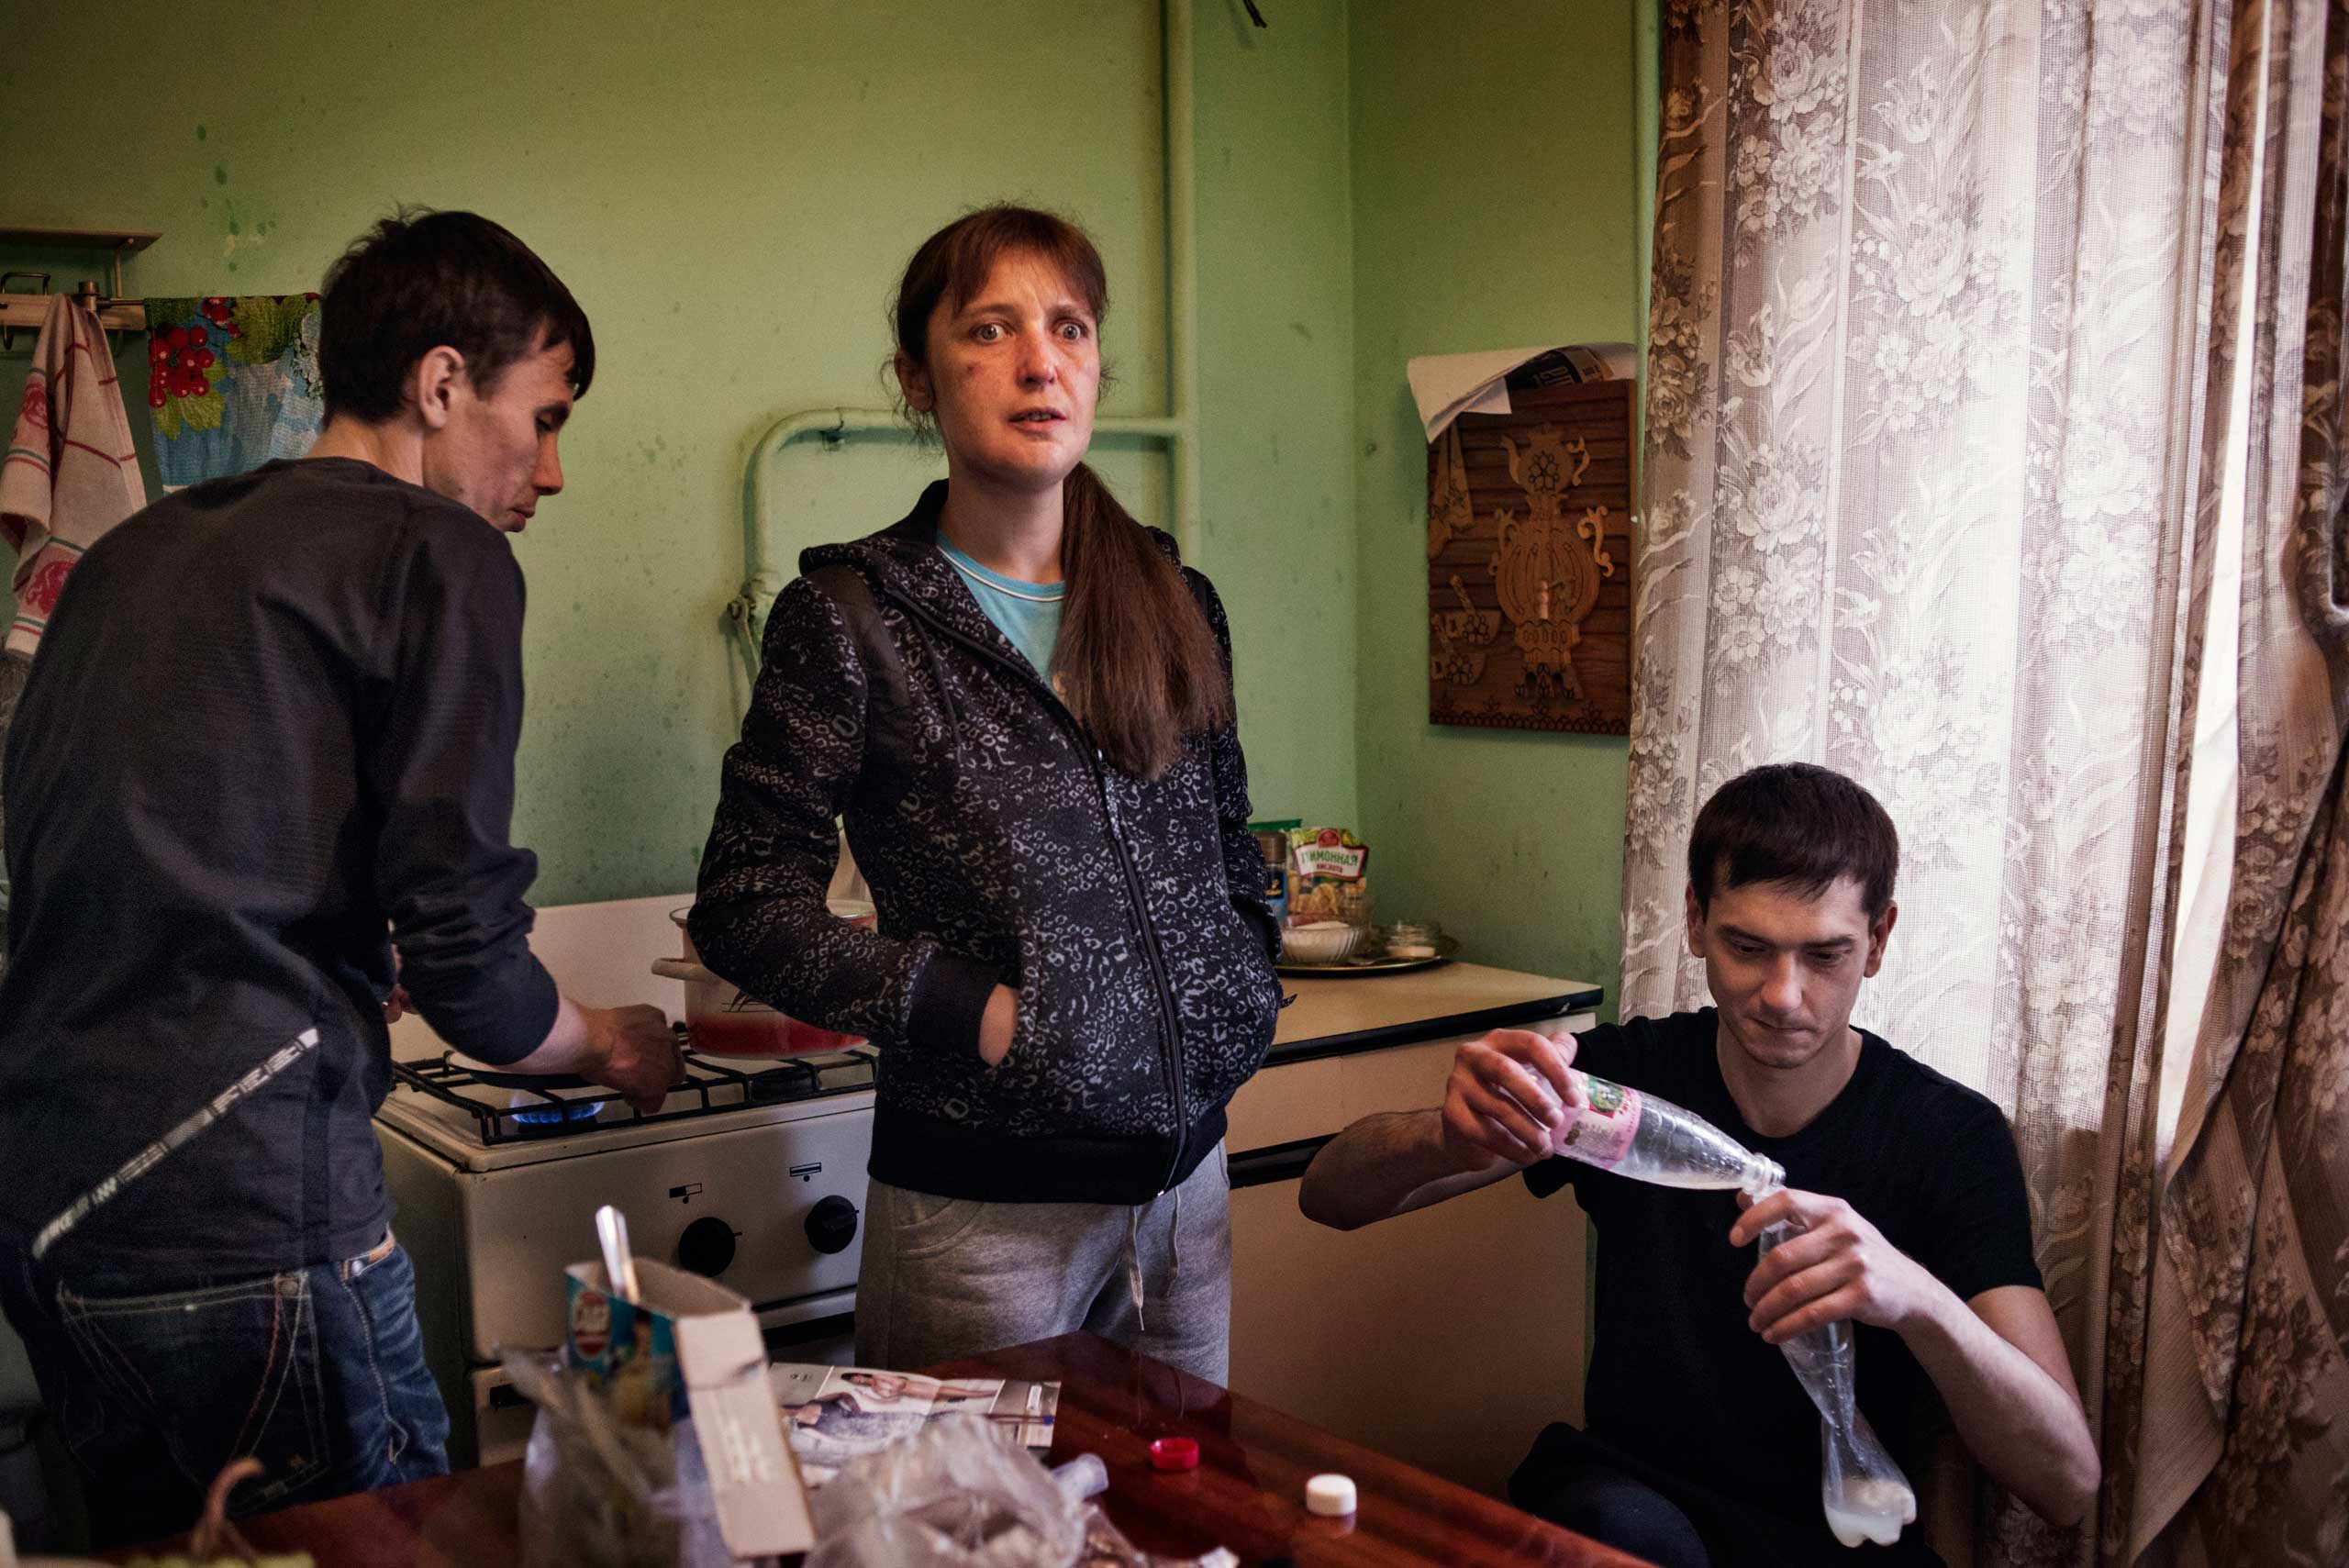 From the left, Alexey, Natalya, 34 years old, and her husband Ilya, 34 years old, prepare krokodil in a kitchen.